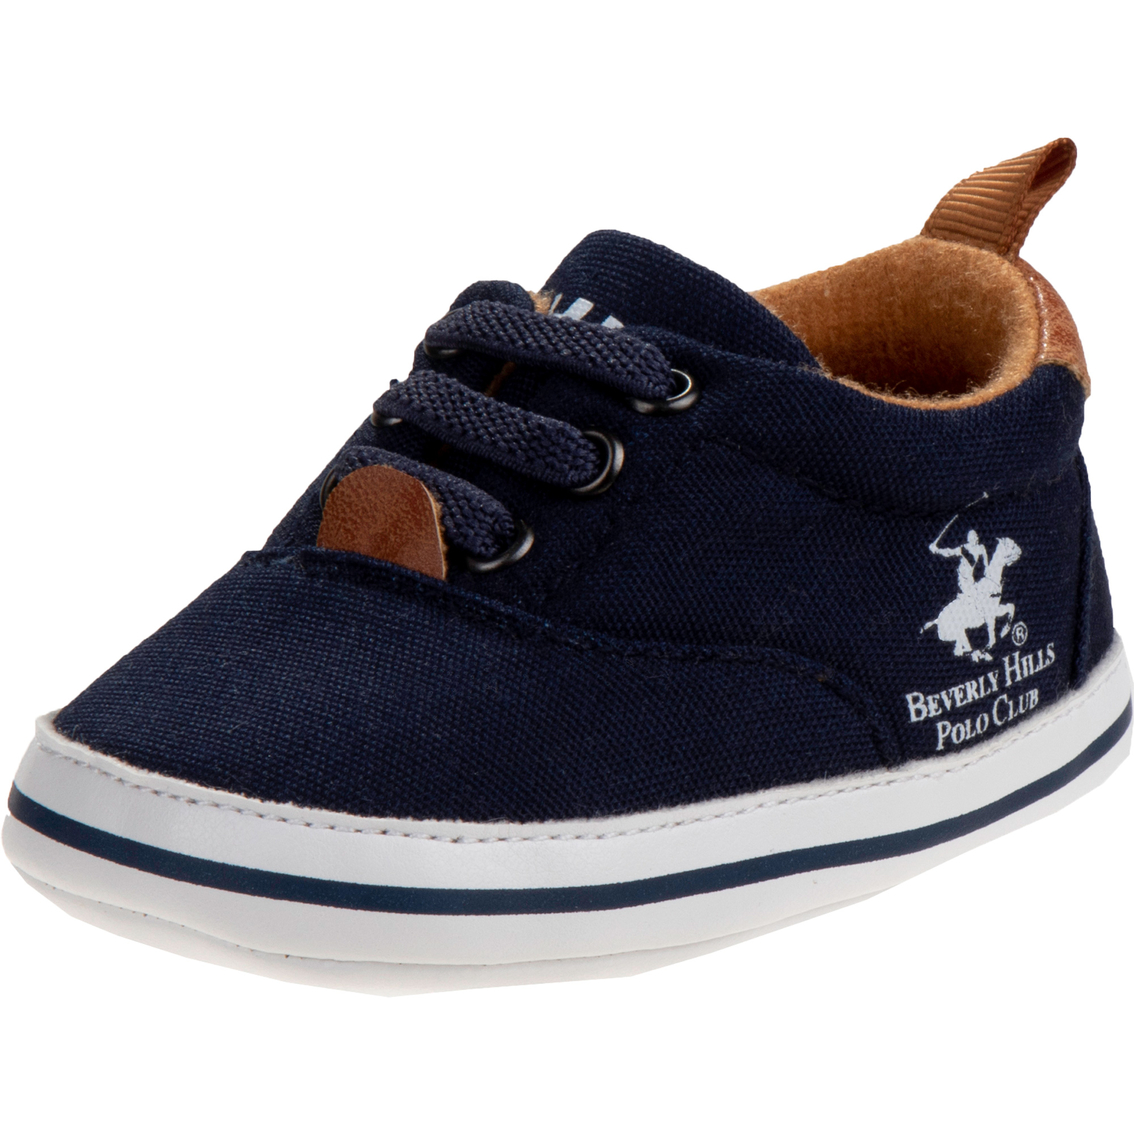 Beverly Hills Polo Club Infant Boys Sneakers | Sneakers | Shoes | Shop ...